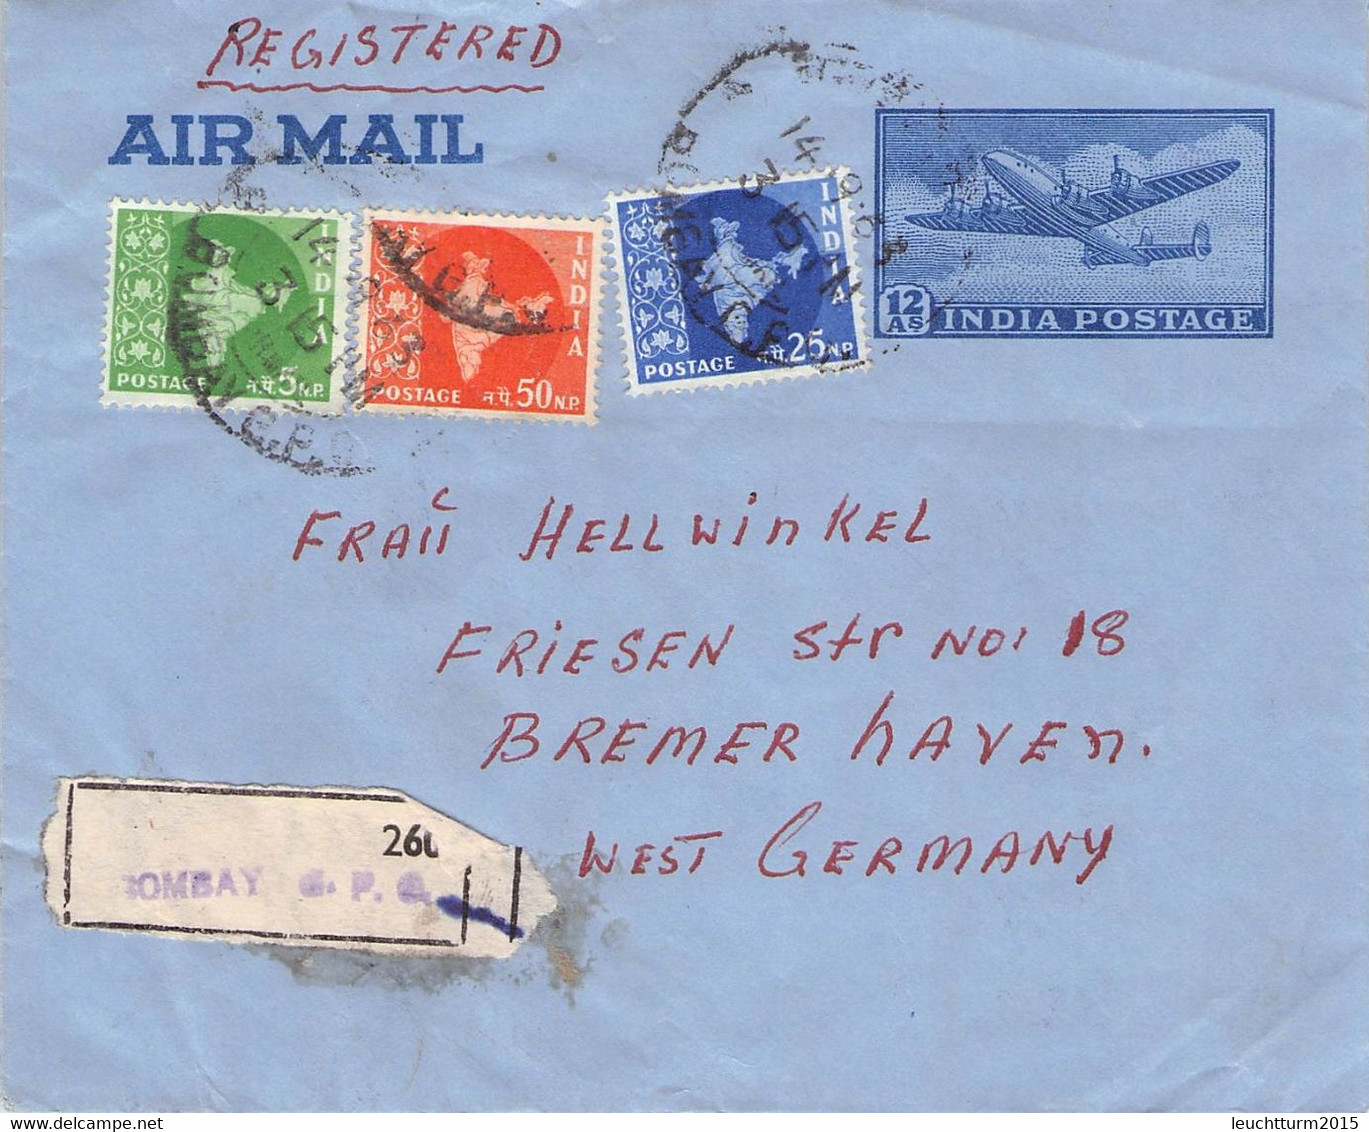 INDIA - AIRMAIL 1963 BOMBAY > BREMERHAVEN/GEERMANY /G114 - Airmail